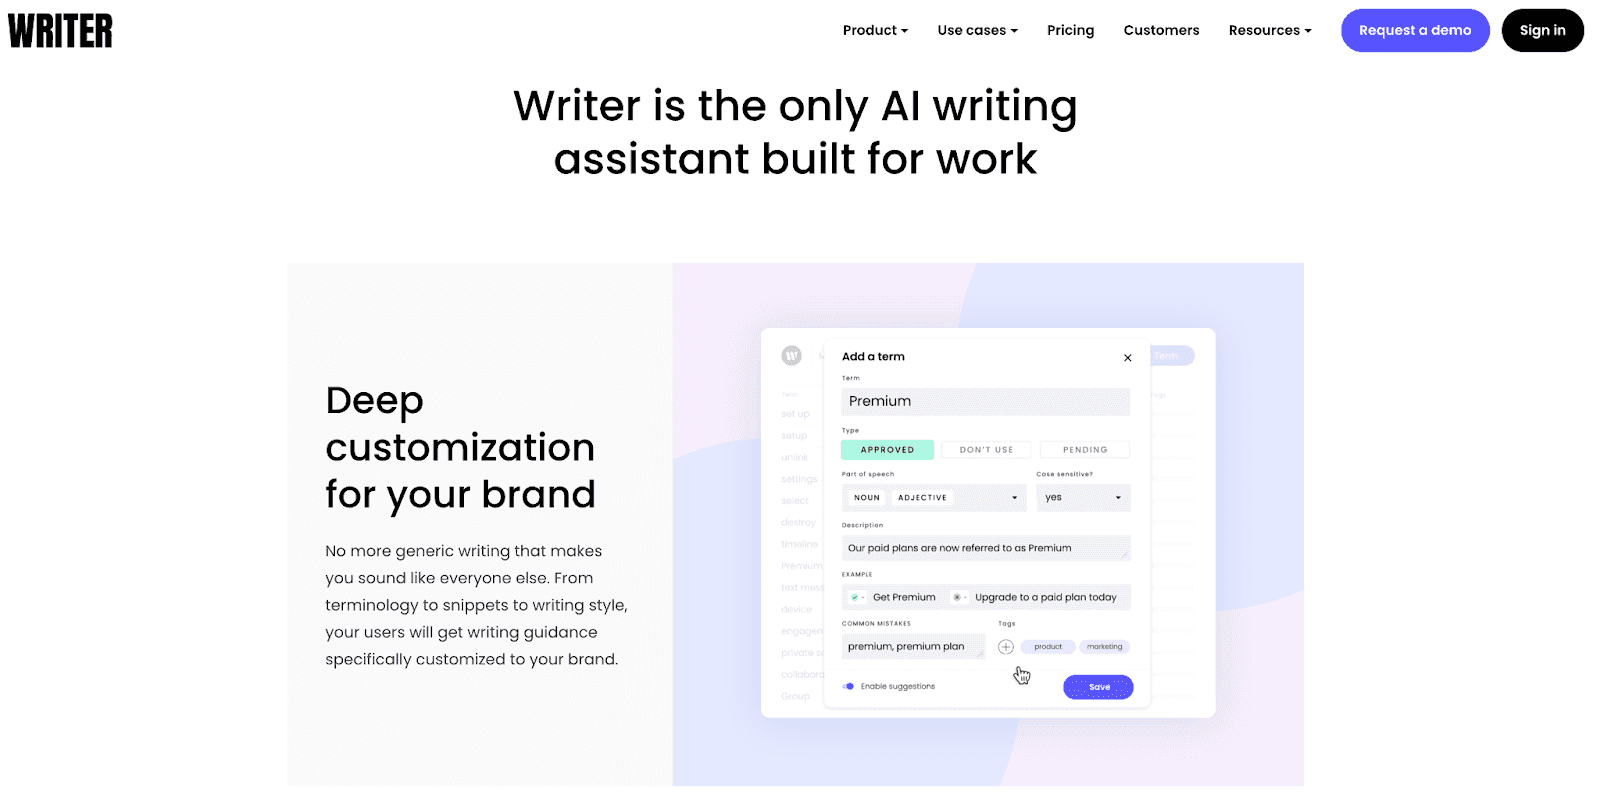 Writer is the only AI writing assistant built for work